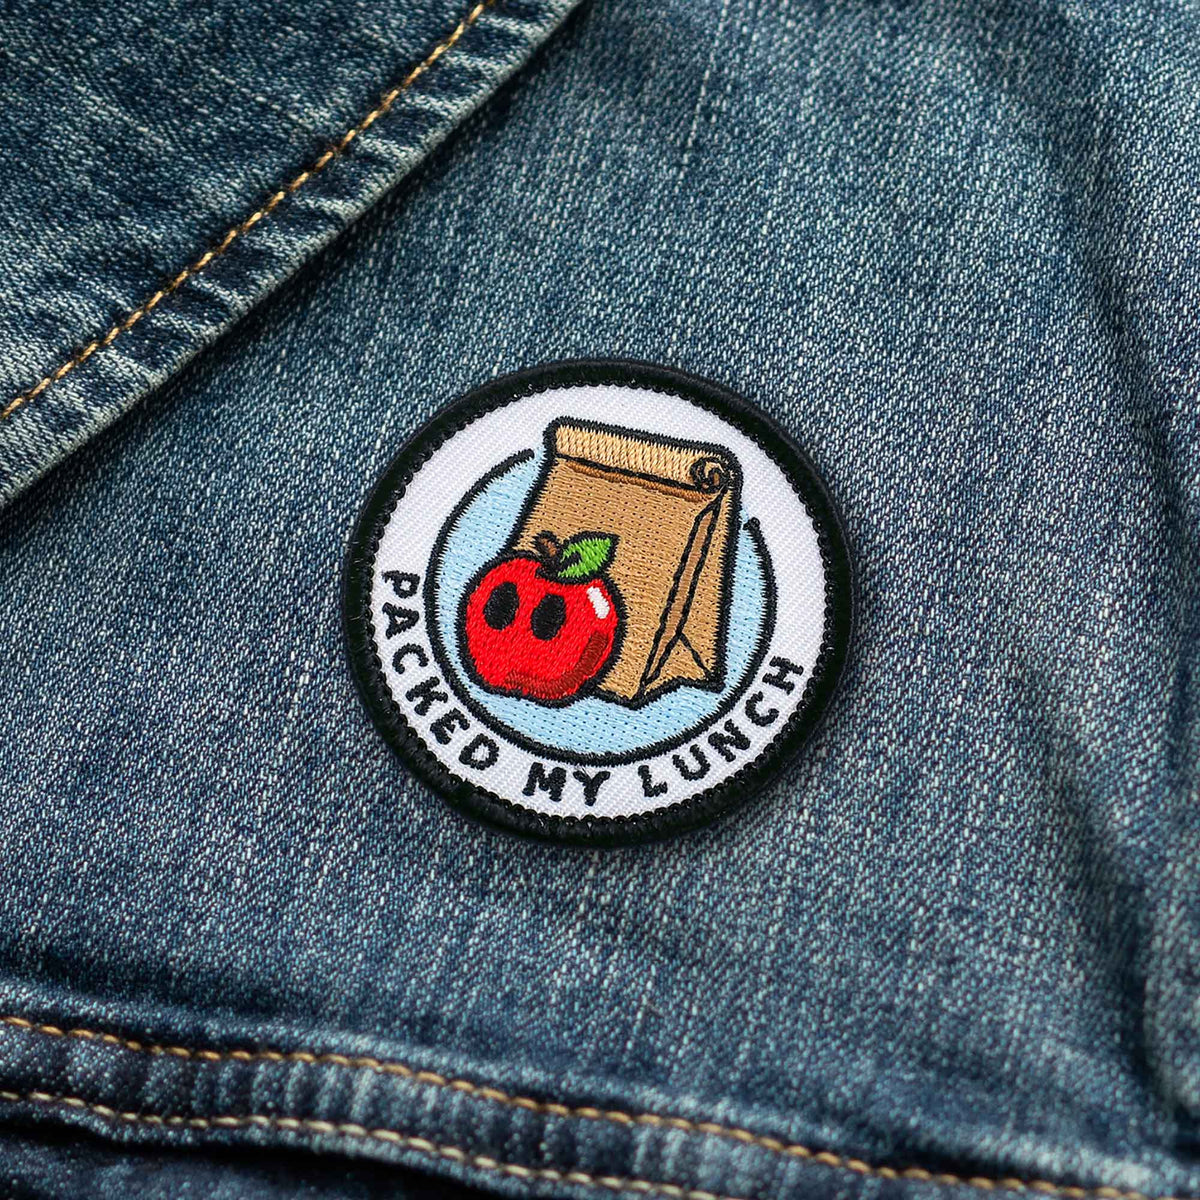 Packed My Lunch adulting merit badge patch for adults on denim jacket